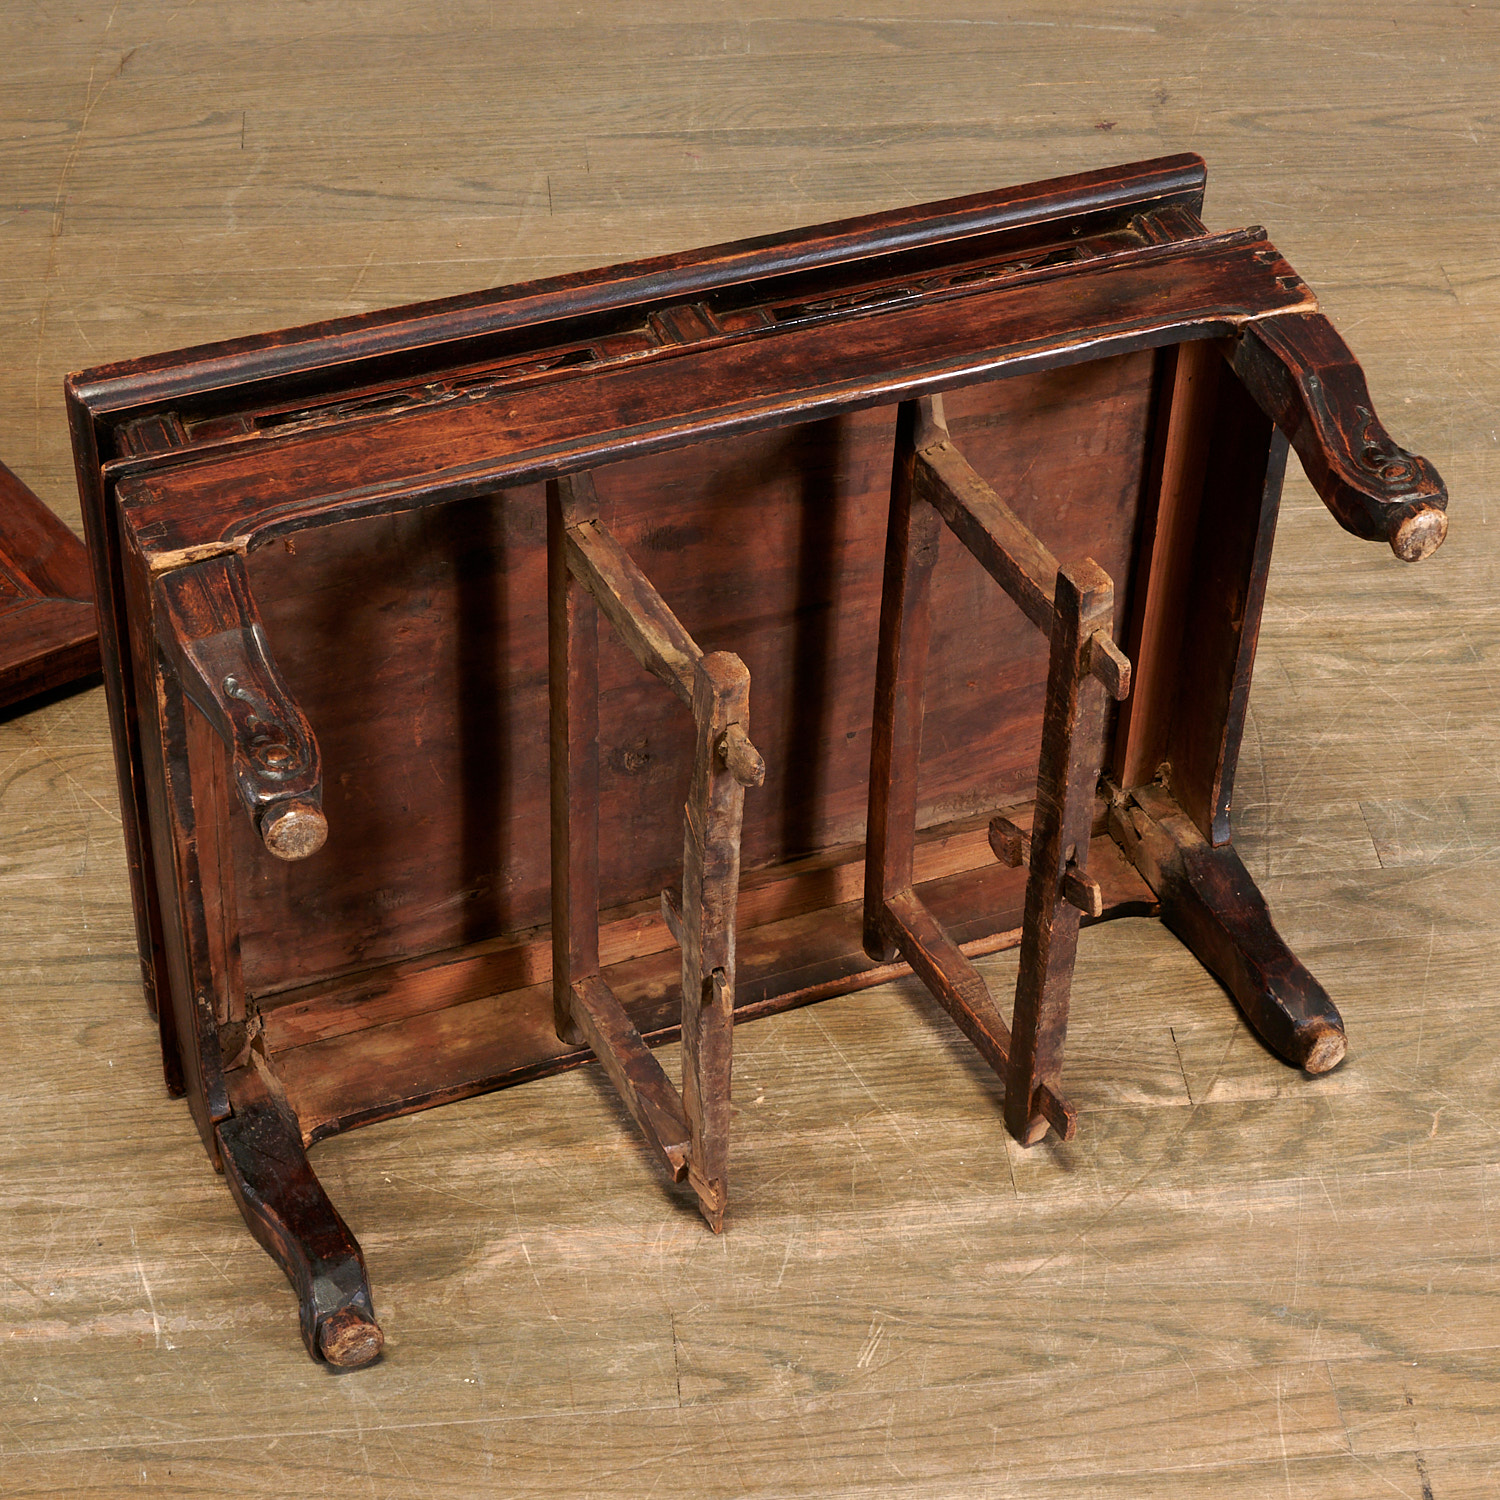 Unusual Chinese hardwood traveling scholar's table - Image 6 of 8